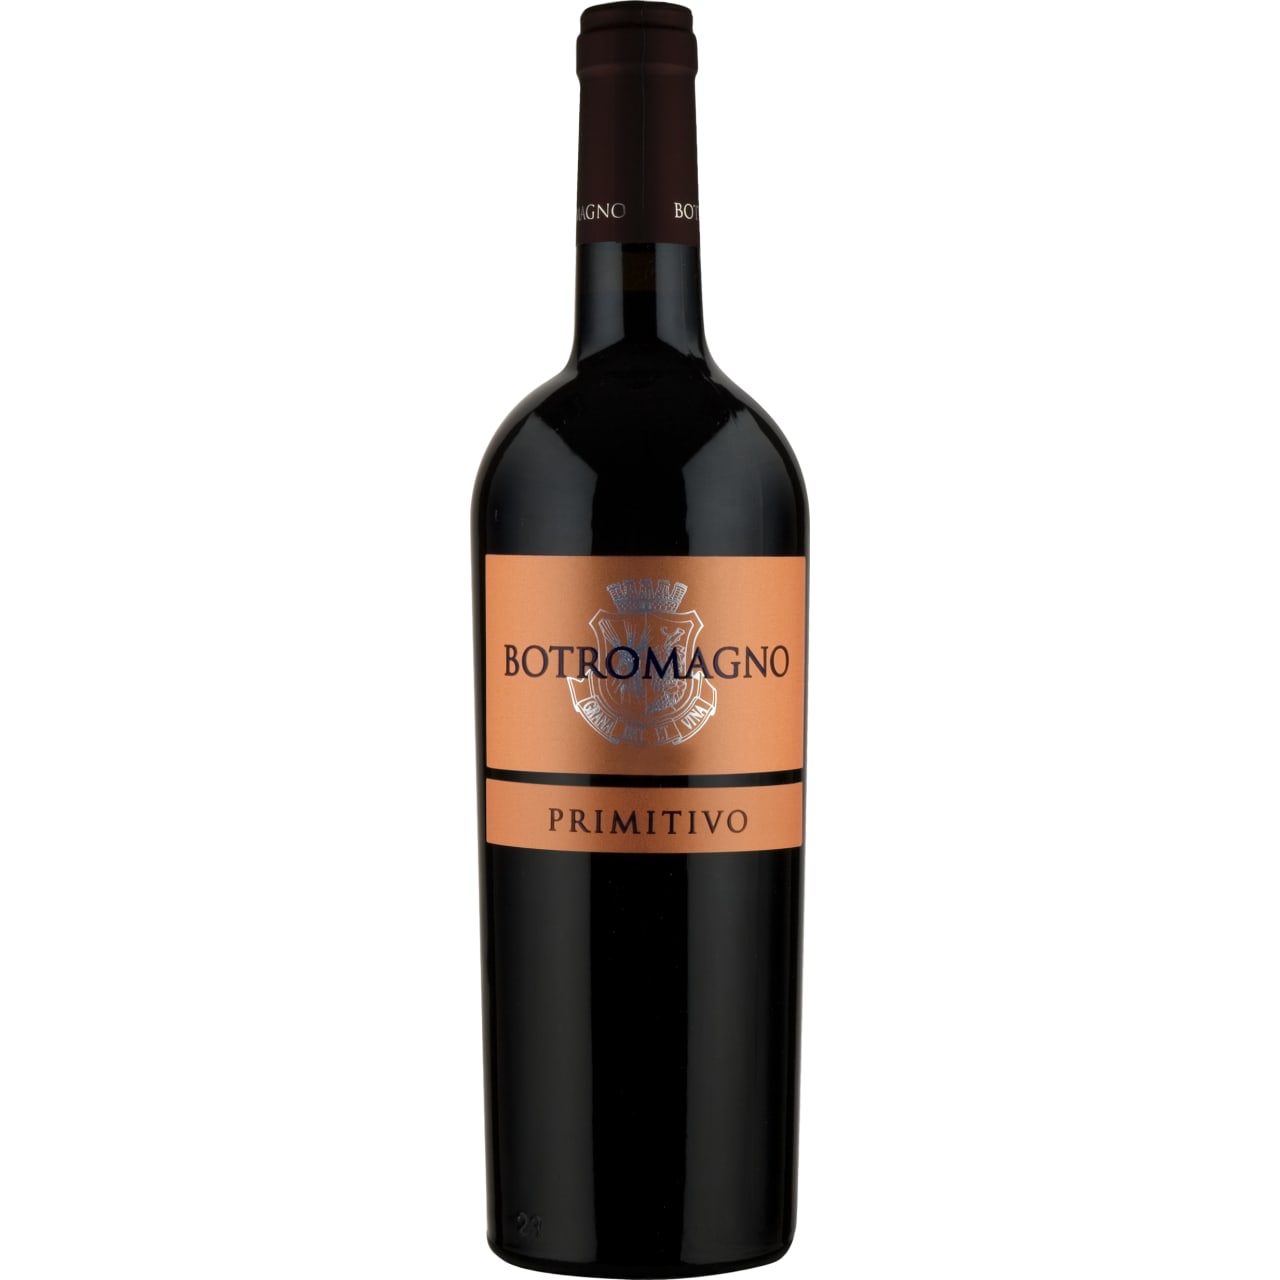 The palate is elegant and intense with soft natural tannins. The alcohol content is distinct but not overpowering.